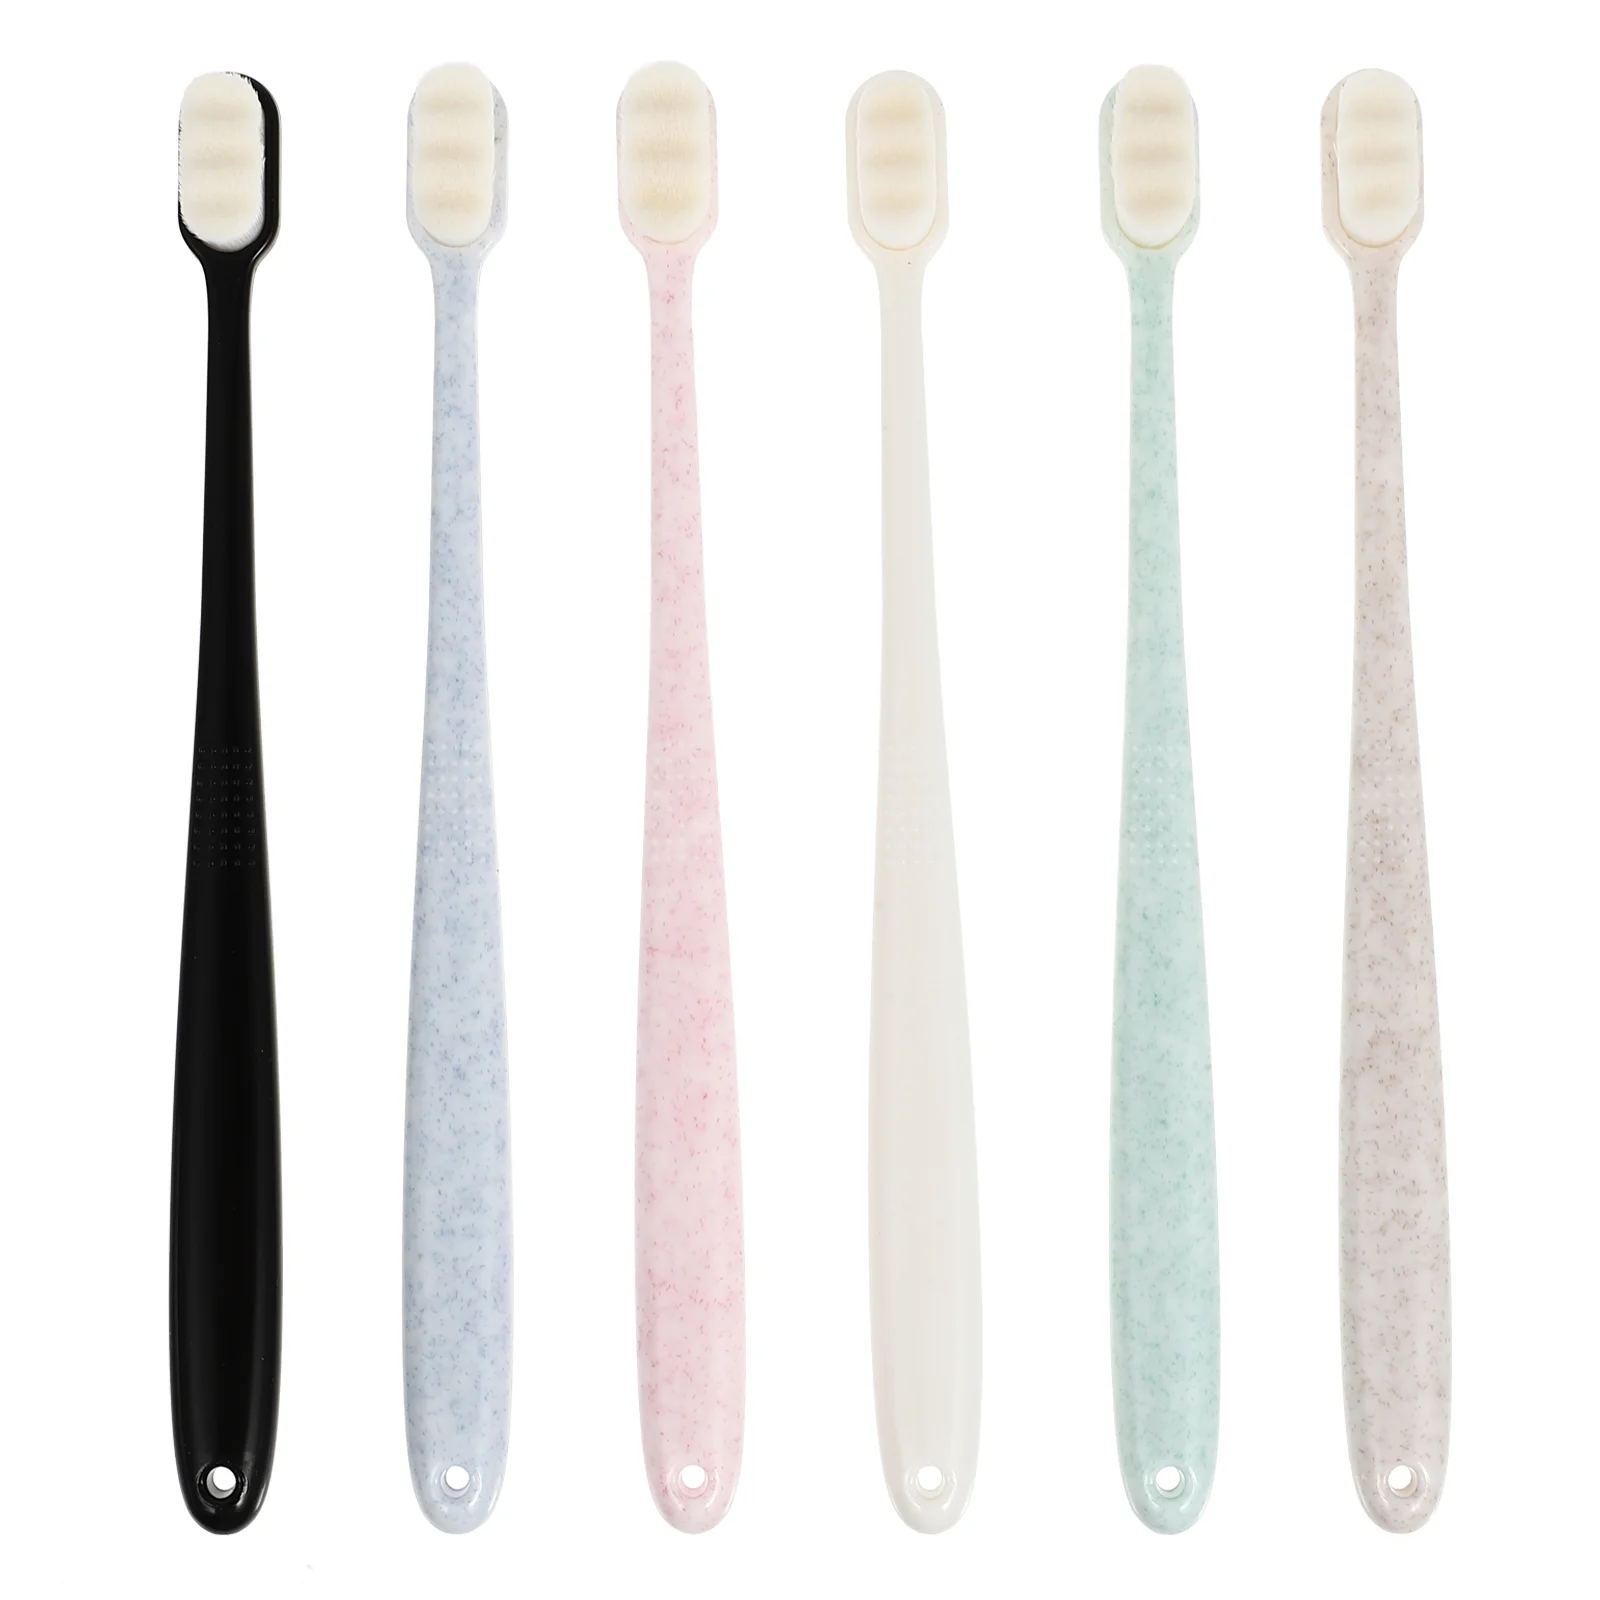 

6pcs Comfortable Practical Toothbrushes Tooth Brush for Co-worker Family Friends